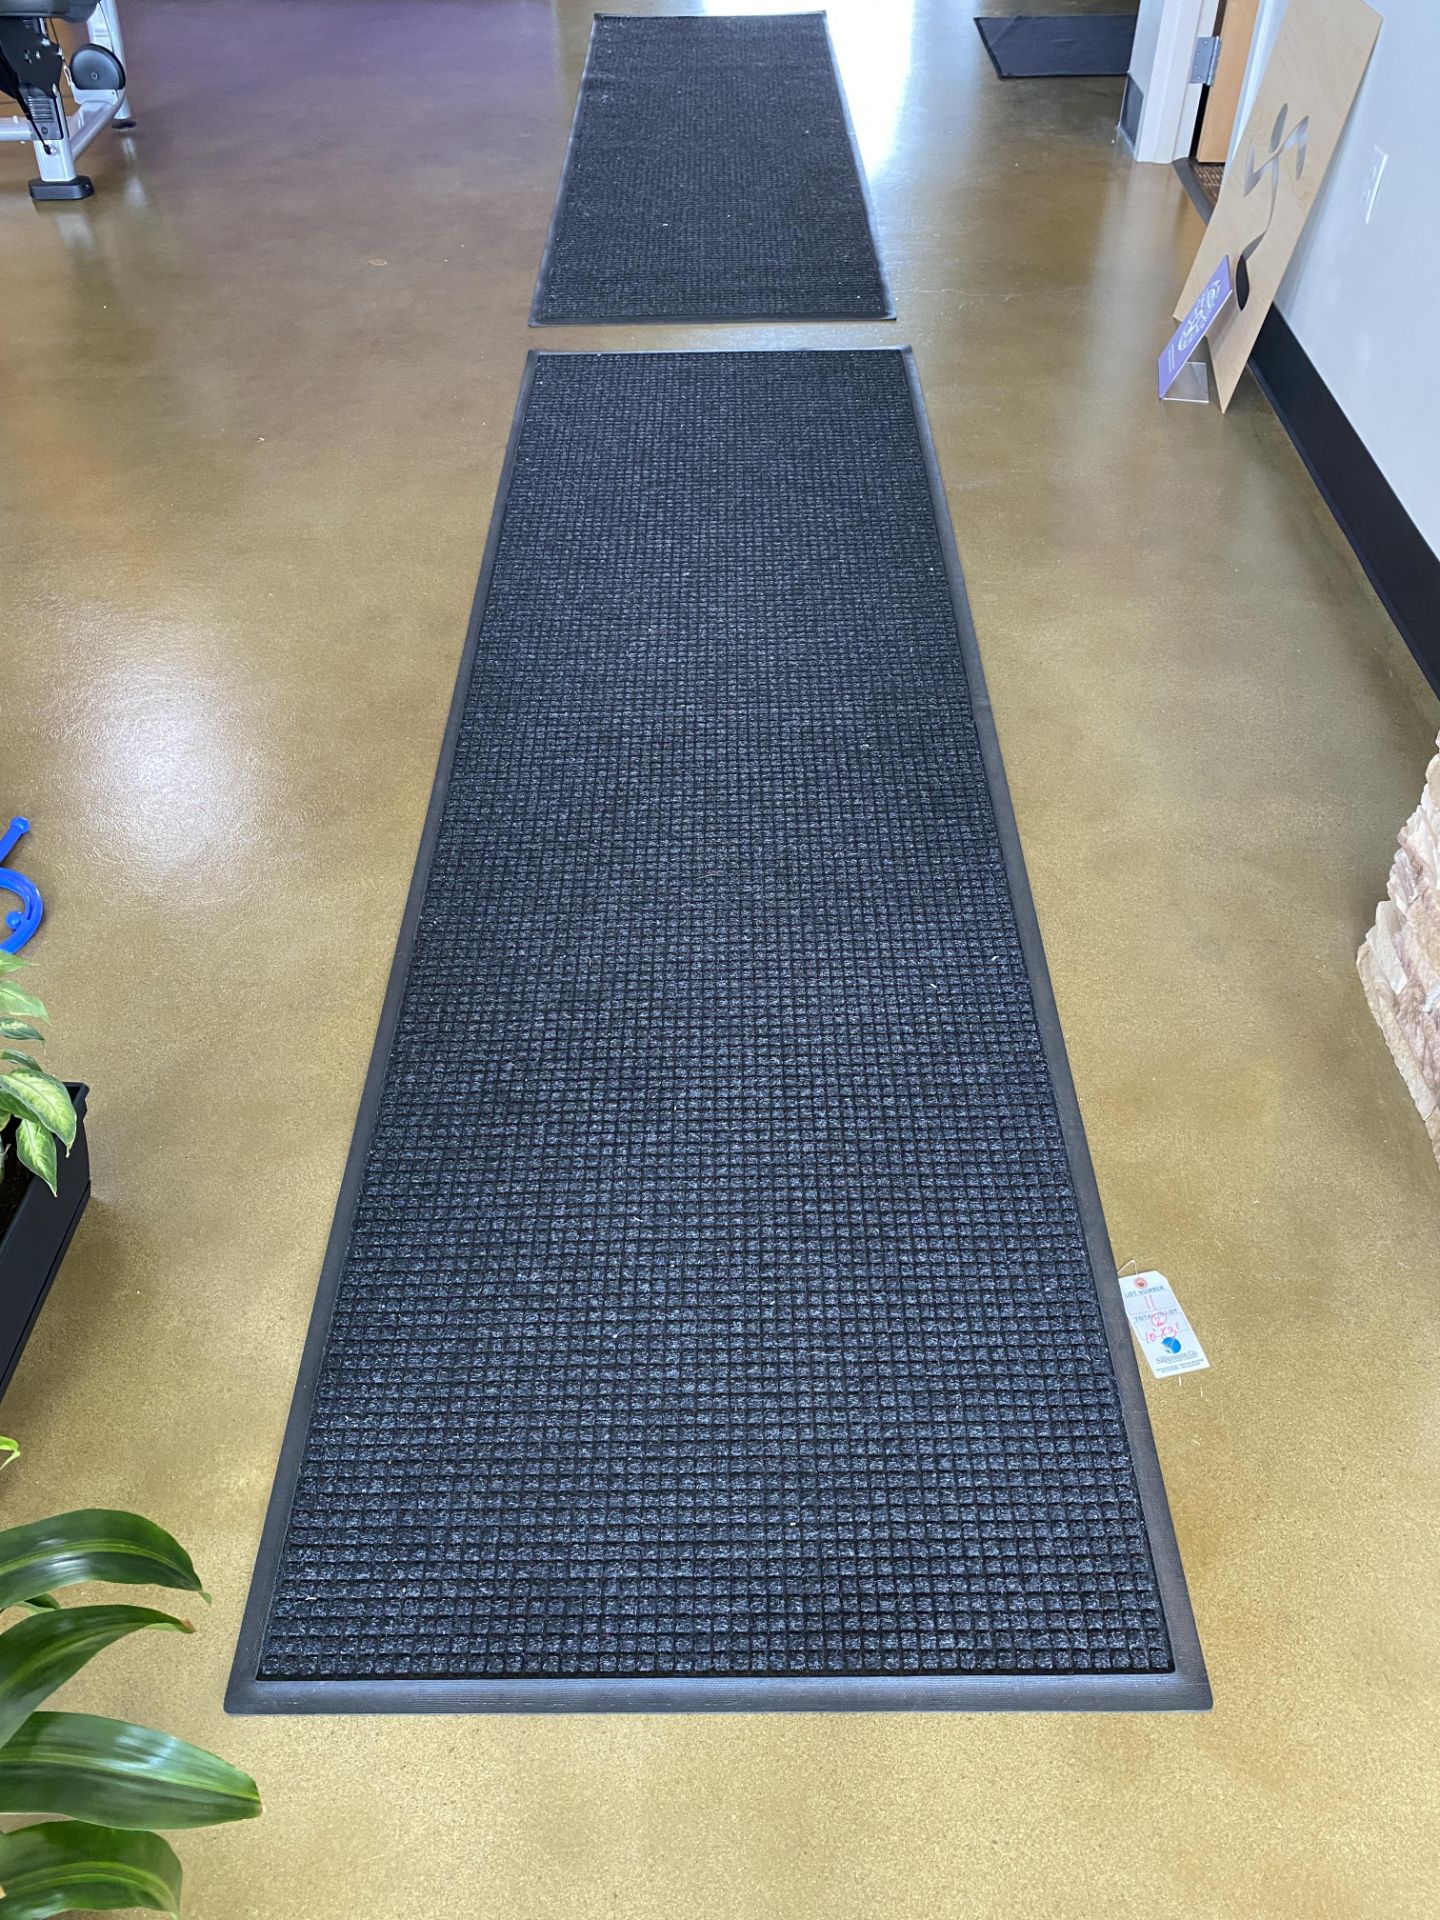 (2) 10'x3' Weather Proof Mat - Image 2 of 2